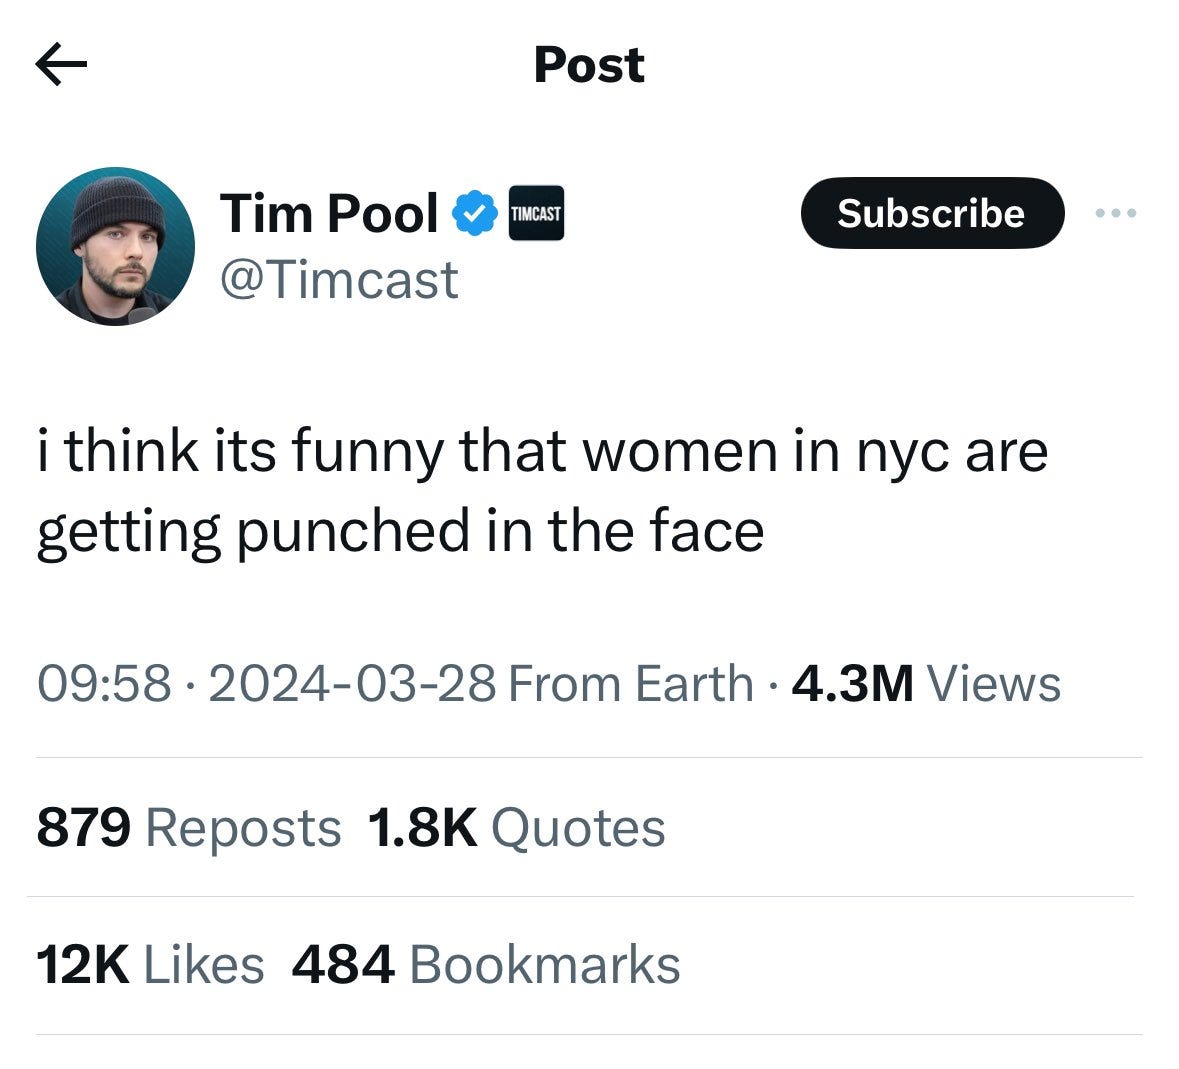 Tim Pool I think its funny that women in nyc are getting punched in the face